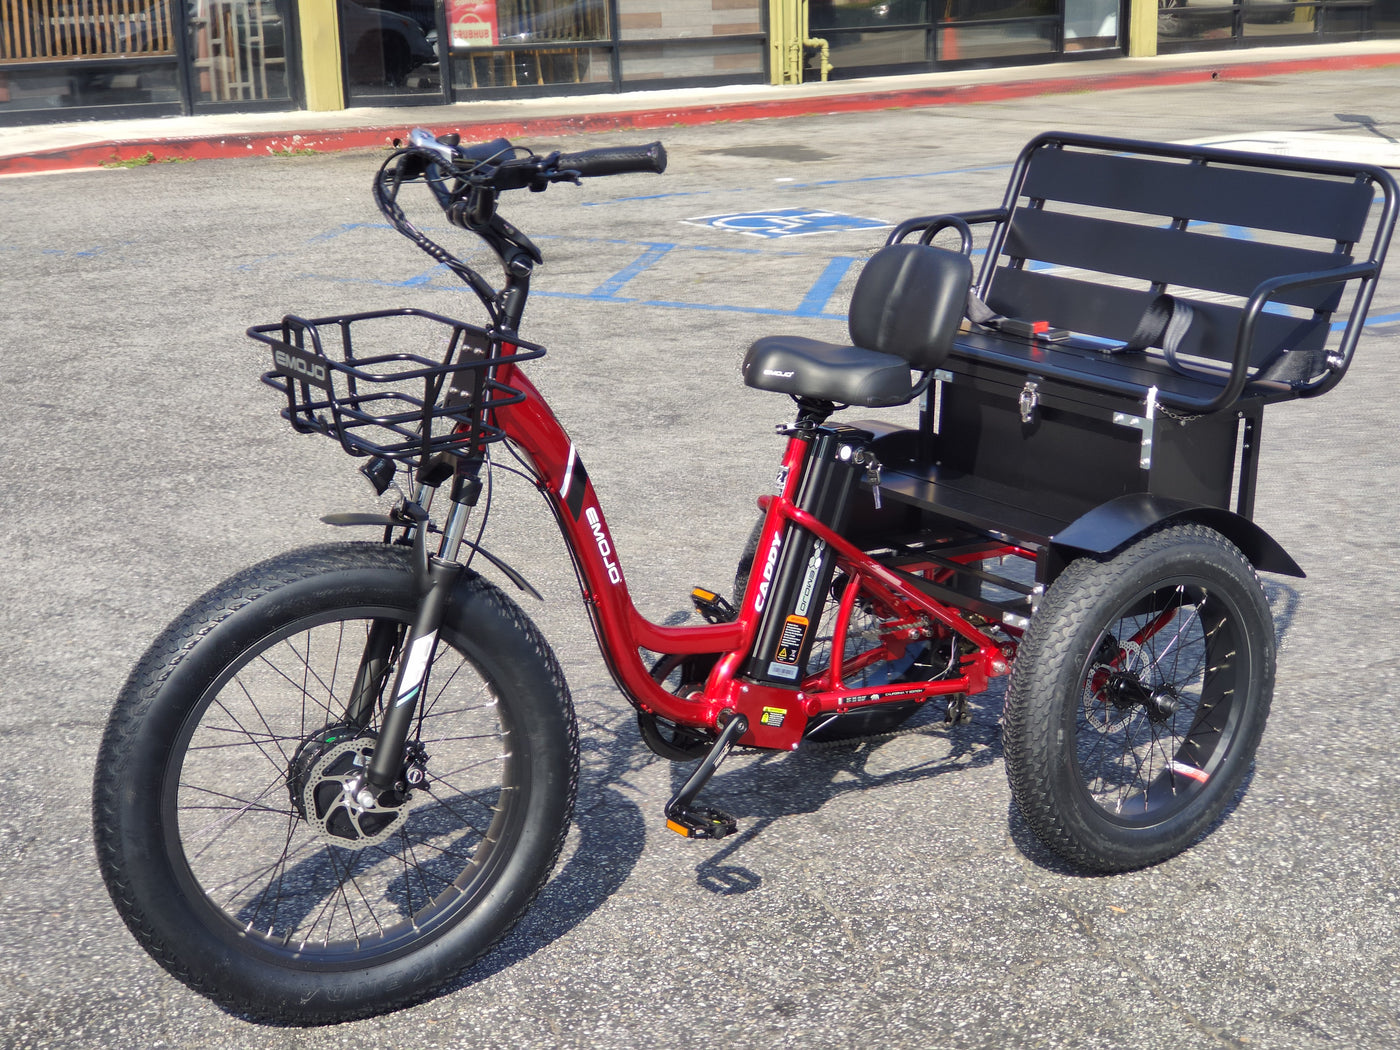 Emojo Caddy Pro e-Trike | Adult Electric Tricycle